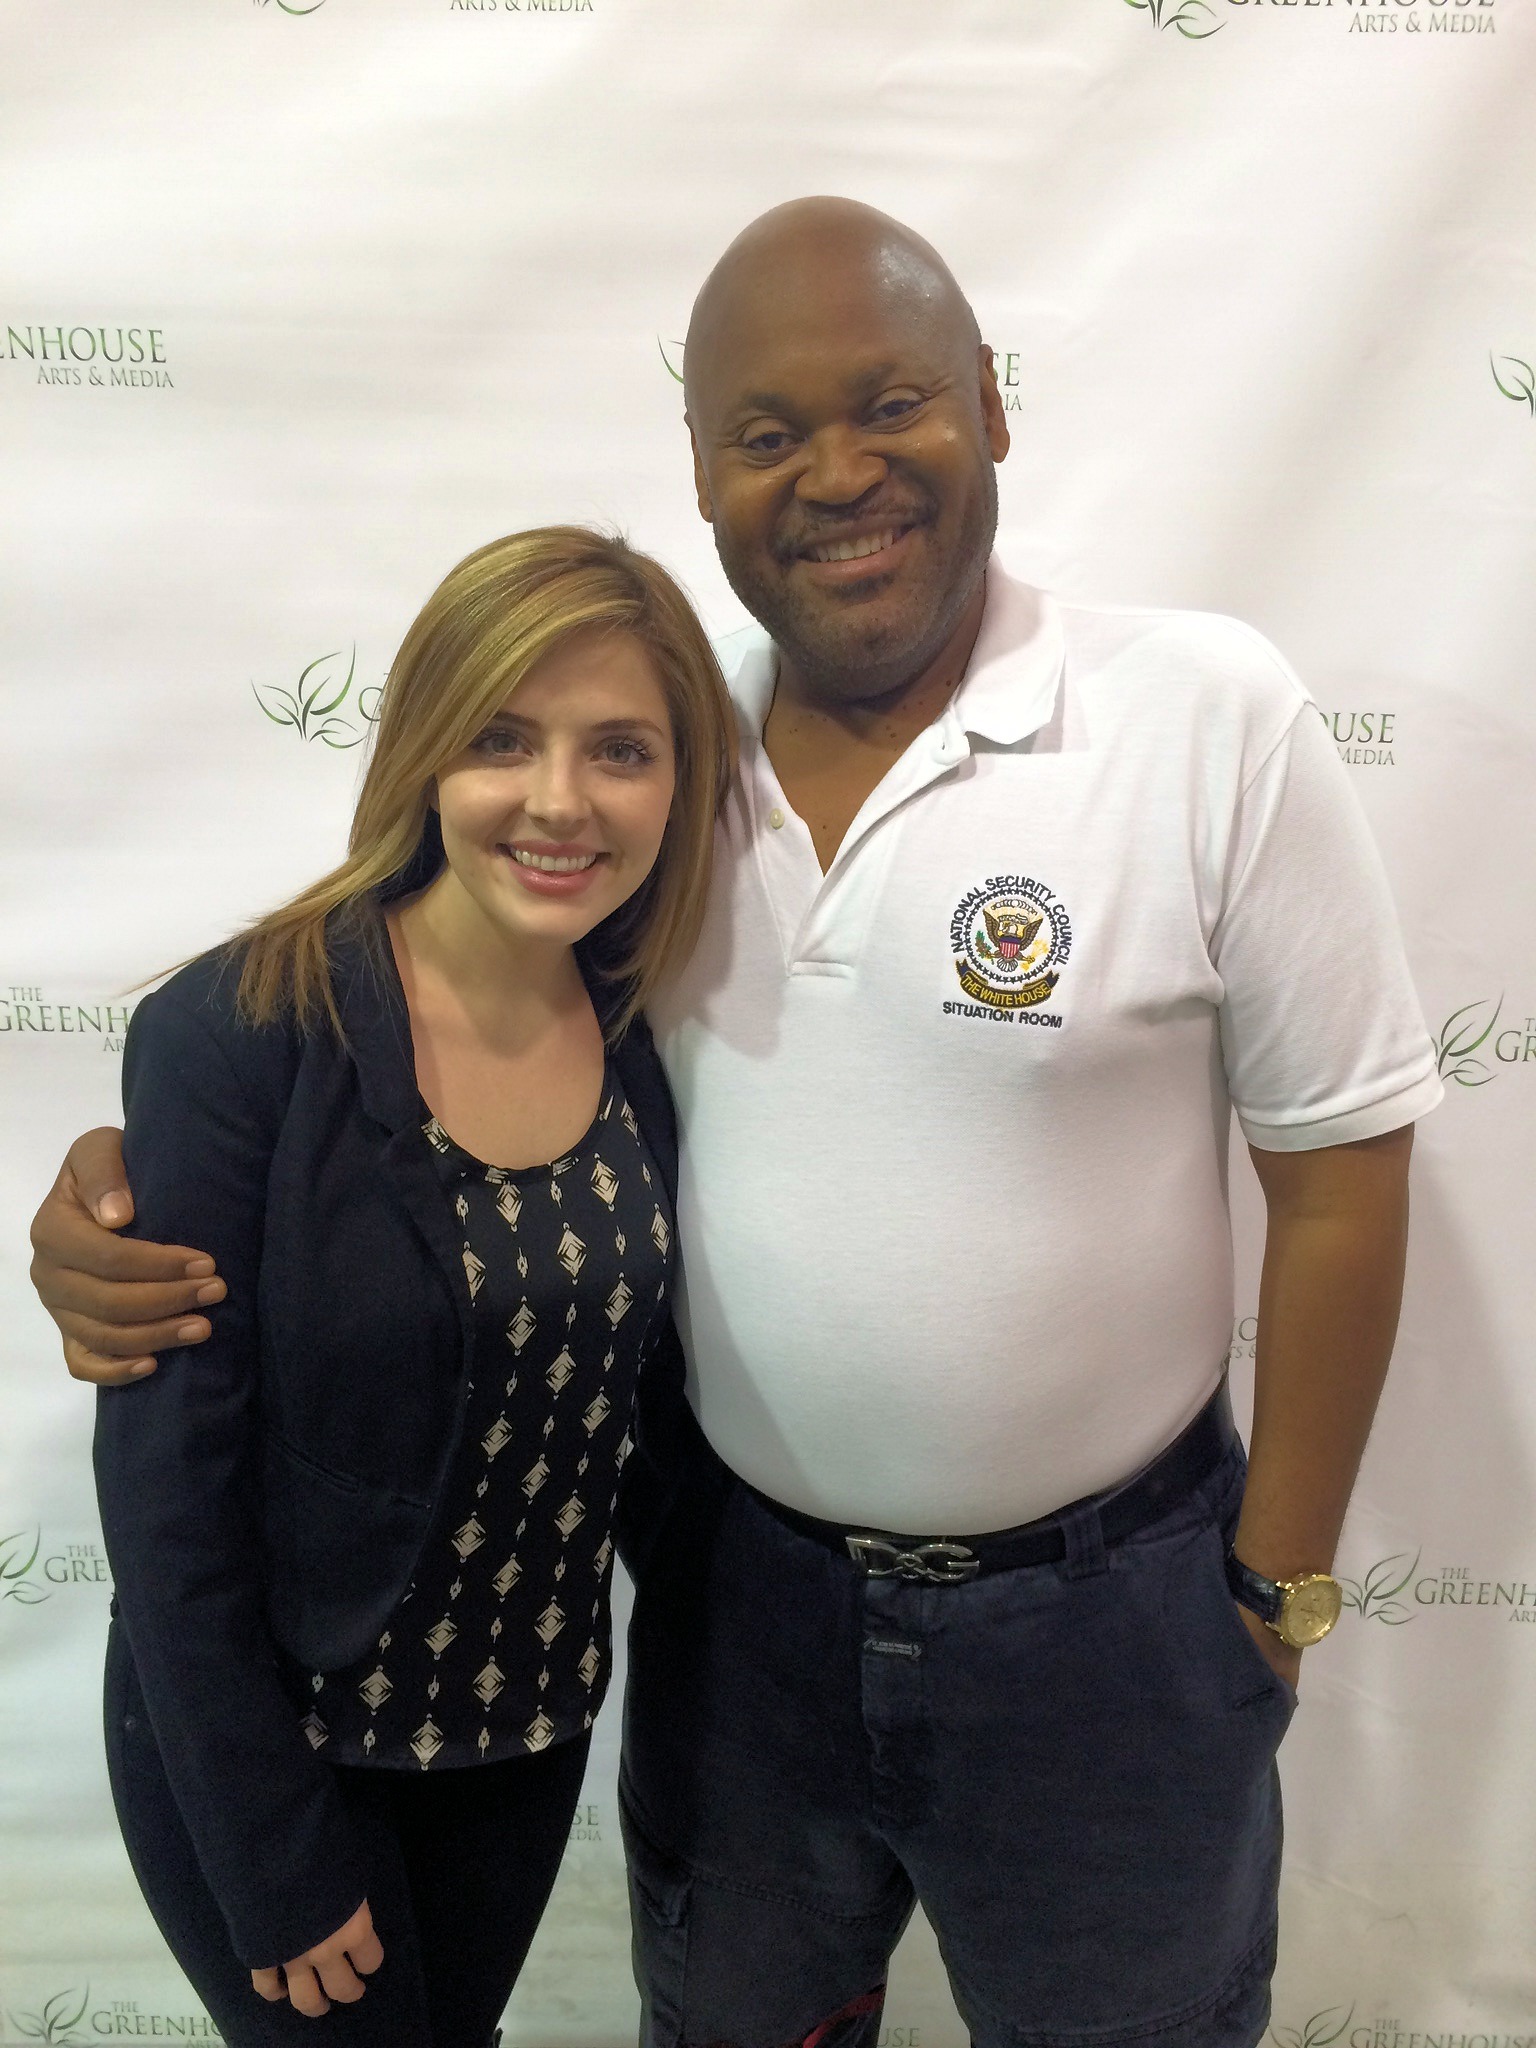 Jen Lilley and Dwayne Conyers